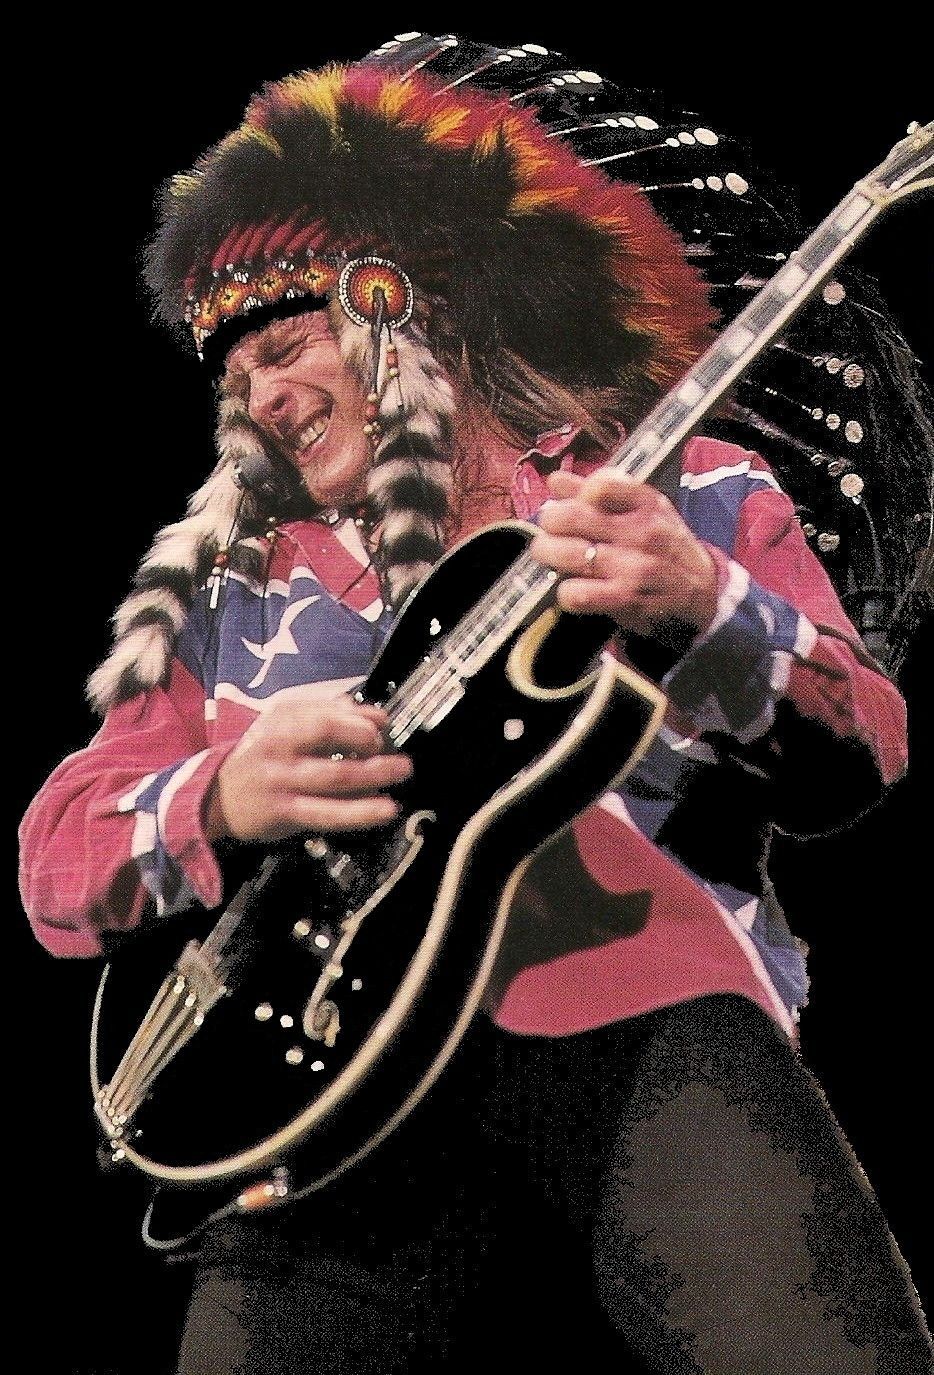 Quotes by Ted Nugent Like Success. Ted, Blues rock, Rock n roll music